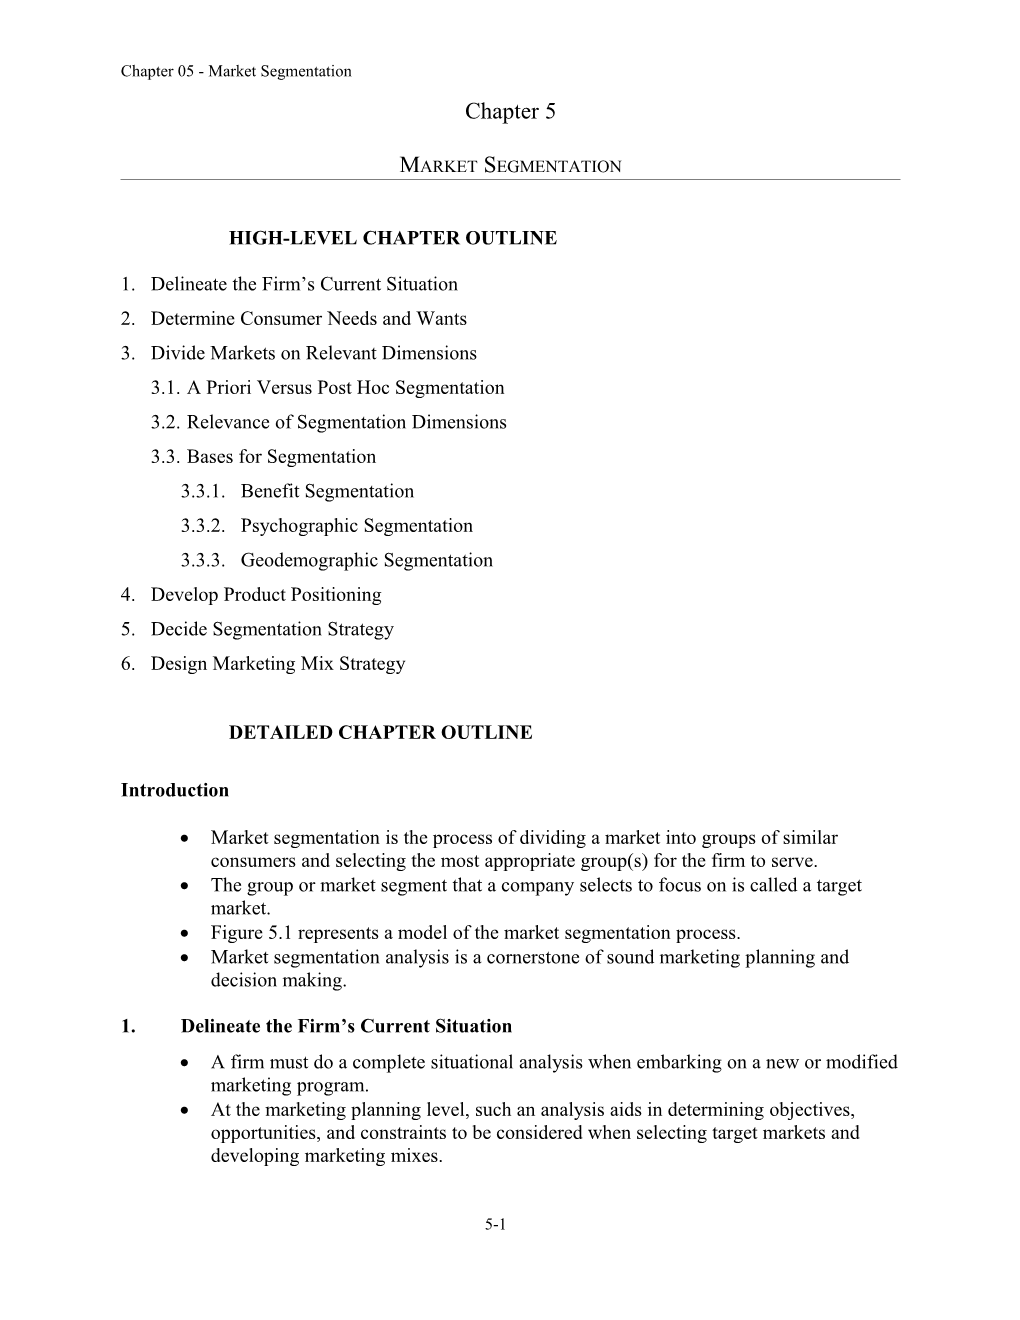 High-Level Chapter Outline